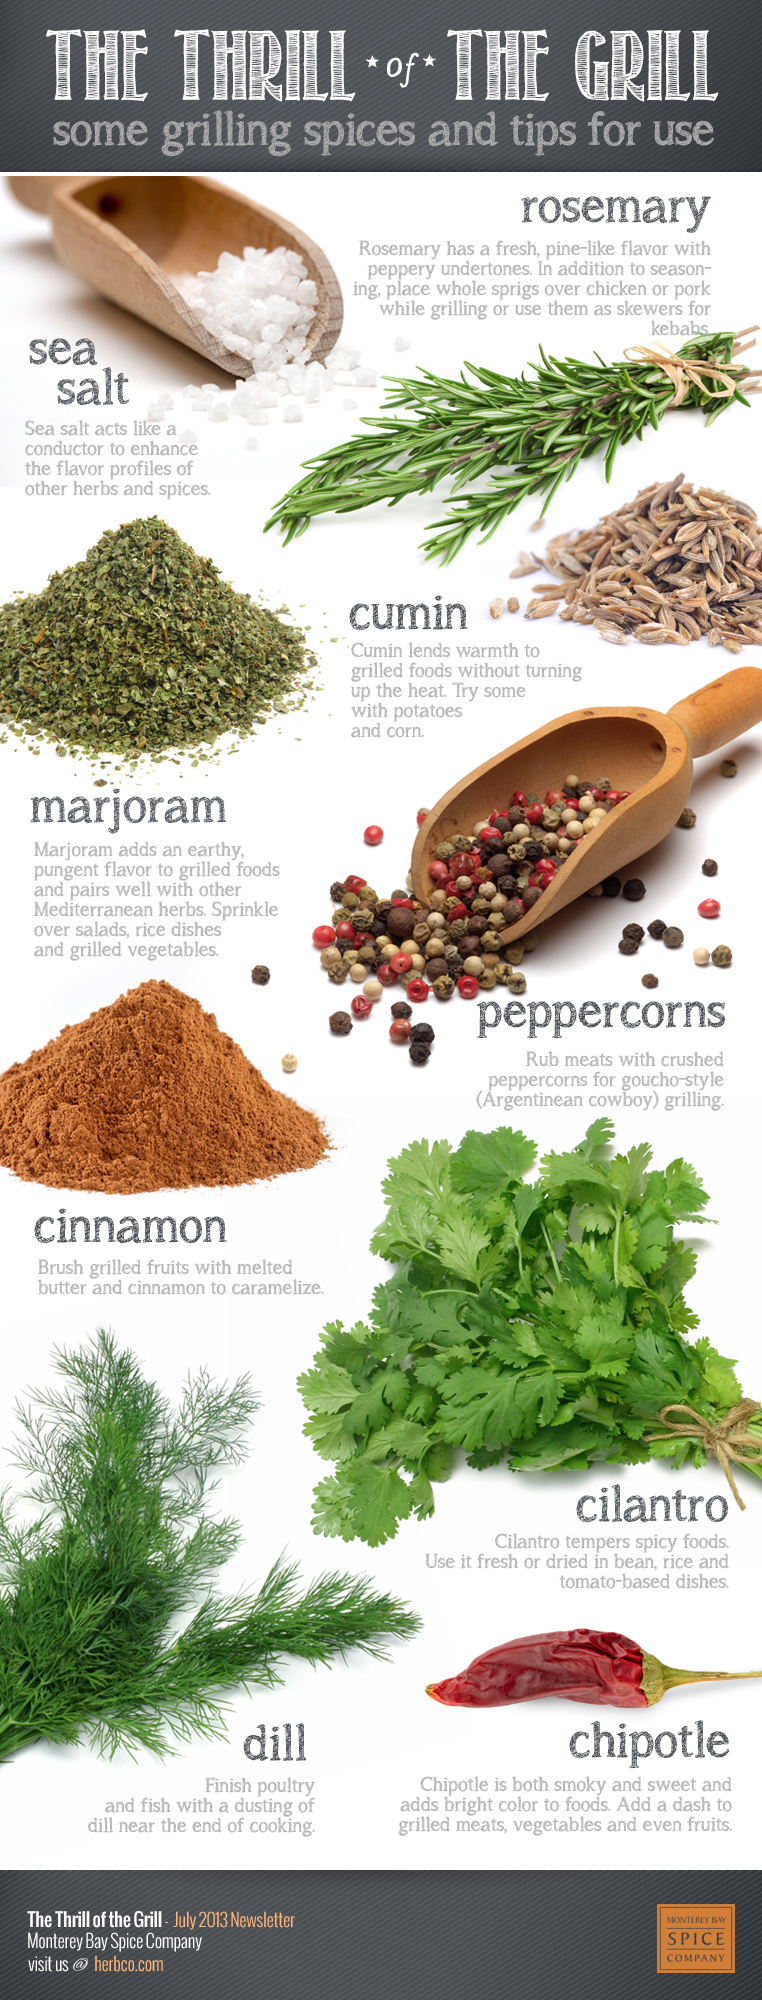 Grill With A Thrill: The Best Grilling Spices To Use Infographic